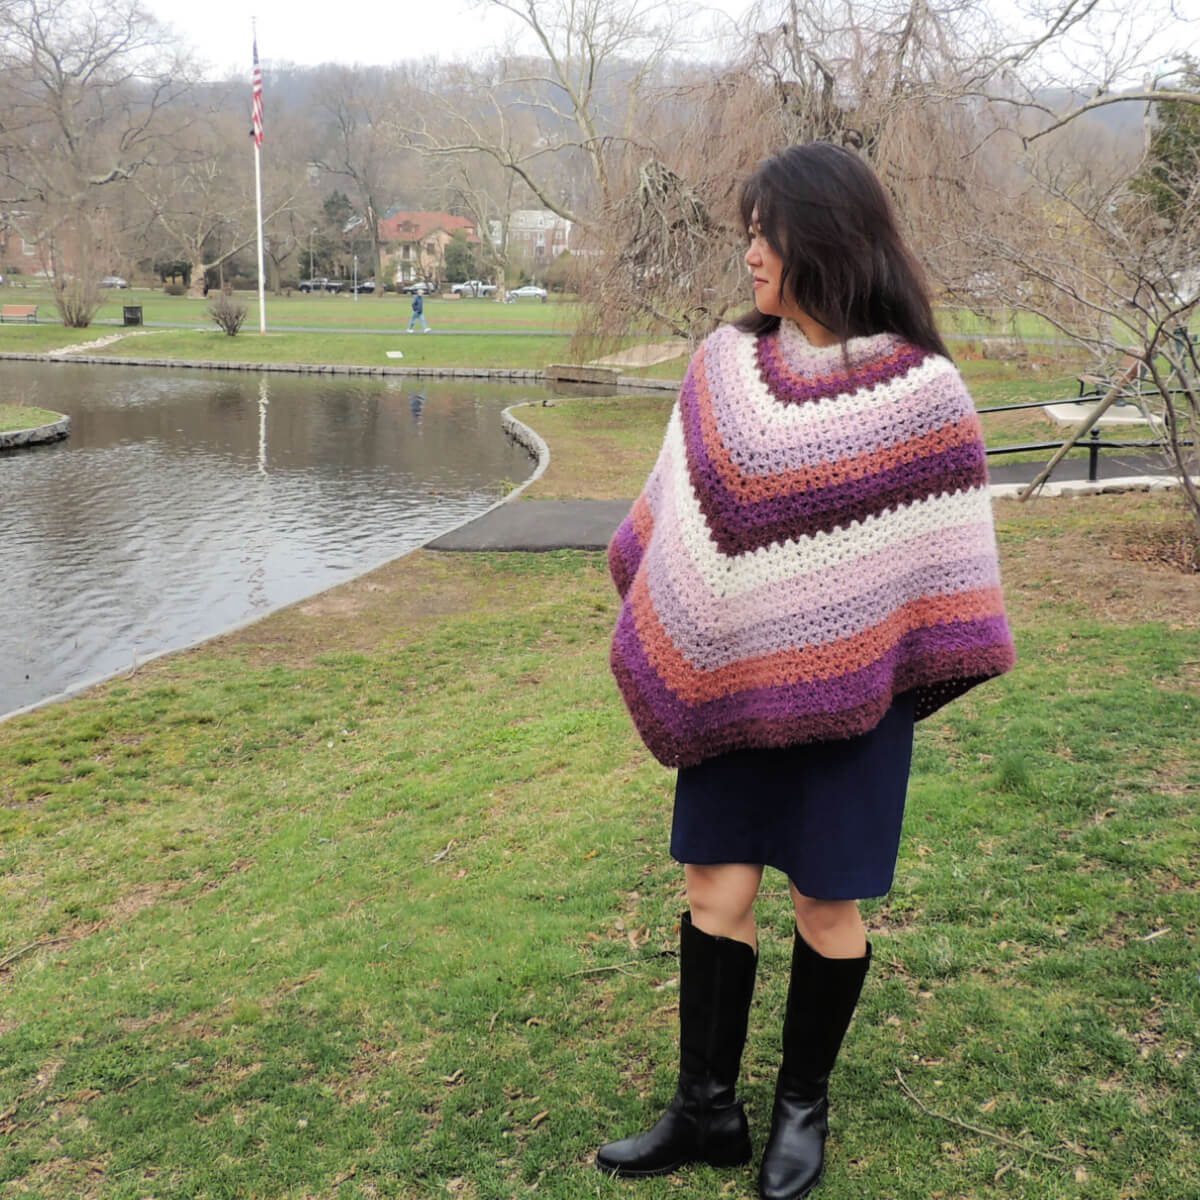 A woman in a park standing next to a small lake. She's wearing a black knee-length skirt, tall black boots, and a classic 2 point poncho crocheted in fuzzy yarn in stripes from the neck down of cream, lilac, lavender, light rust, purple, and burgundy, repeated so each color is seen 3 times. Her shirt can not be seen beneath the poncho.